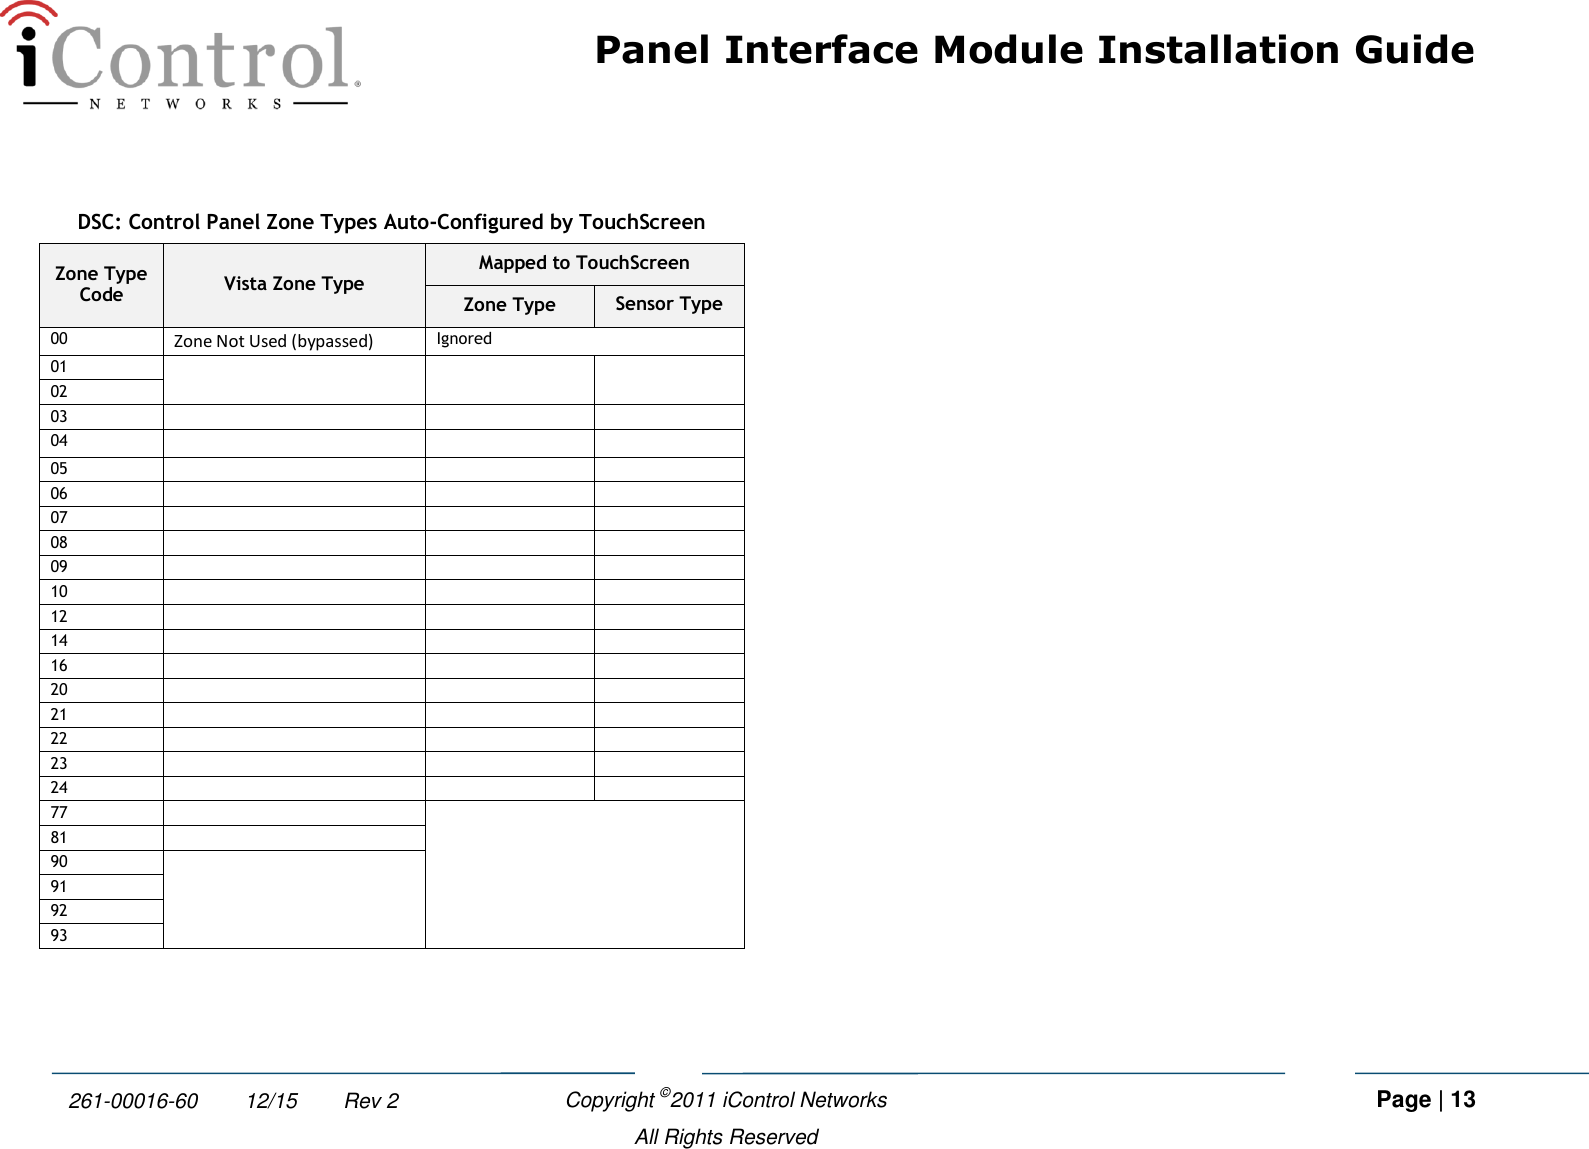 Panel Interface Module Installation Guide    Copyright ©2011 iControl Networks   Page | 13  All Rights Reserved 261-00016-60        12/15        Rev 2  DSC: Control Panel Zone Types Auto-Configured by TouchScreen Zone Type Code Vista Zone Type Mapped to TouchScreen Zone Type Sensor Type 00 Zone Not Used (bypassed) Ignored 01    02 03    04    05    06    07    08    09    10    12    14    16    20    21    22    23    24    77   81  90  91 92 93      